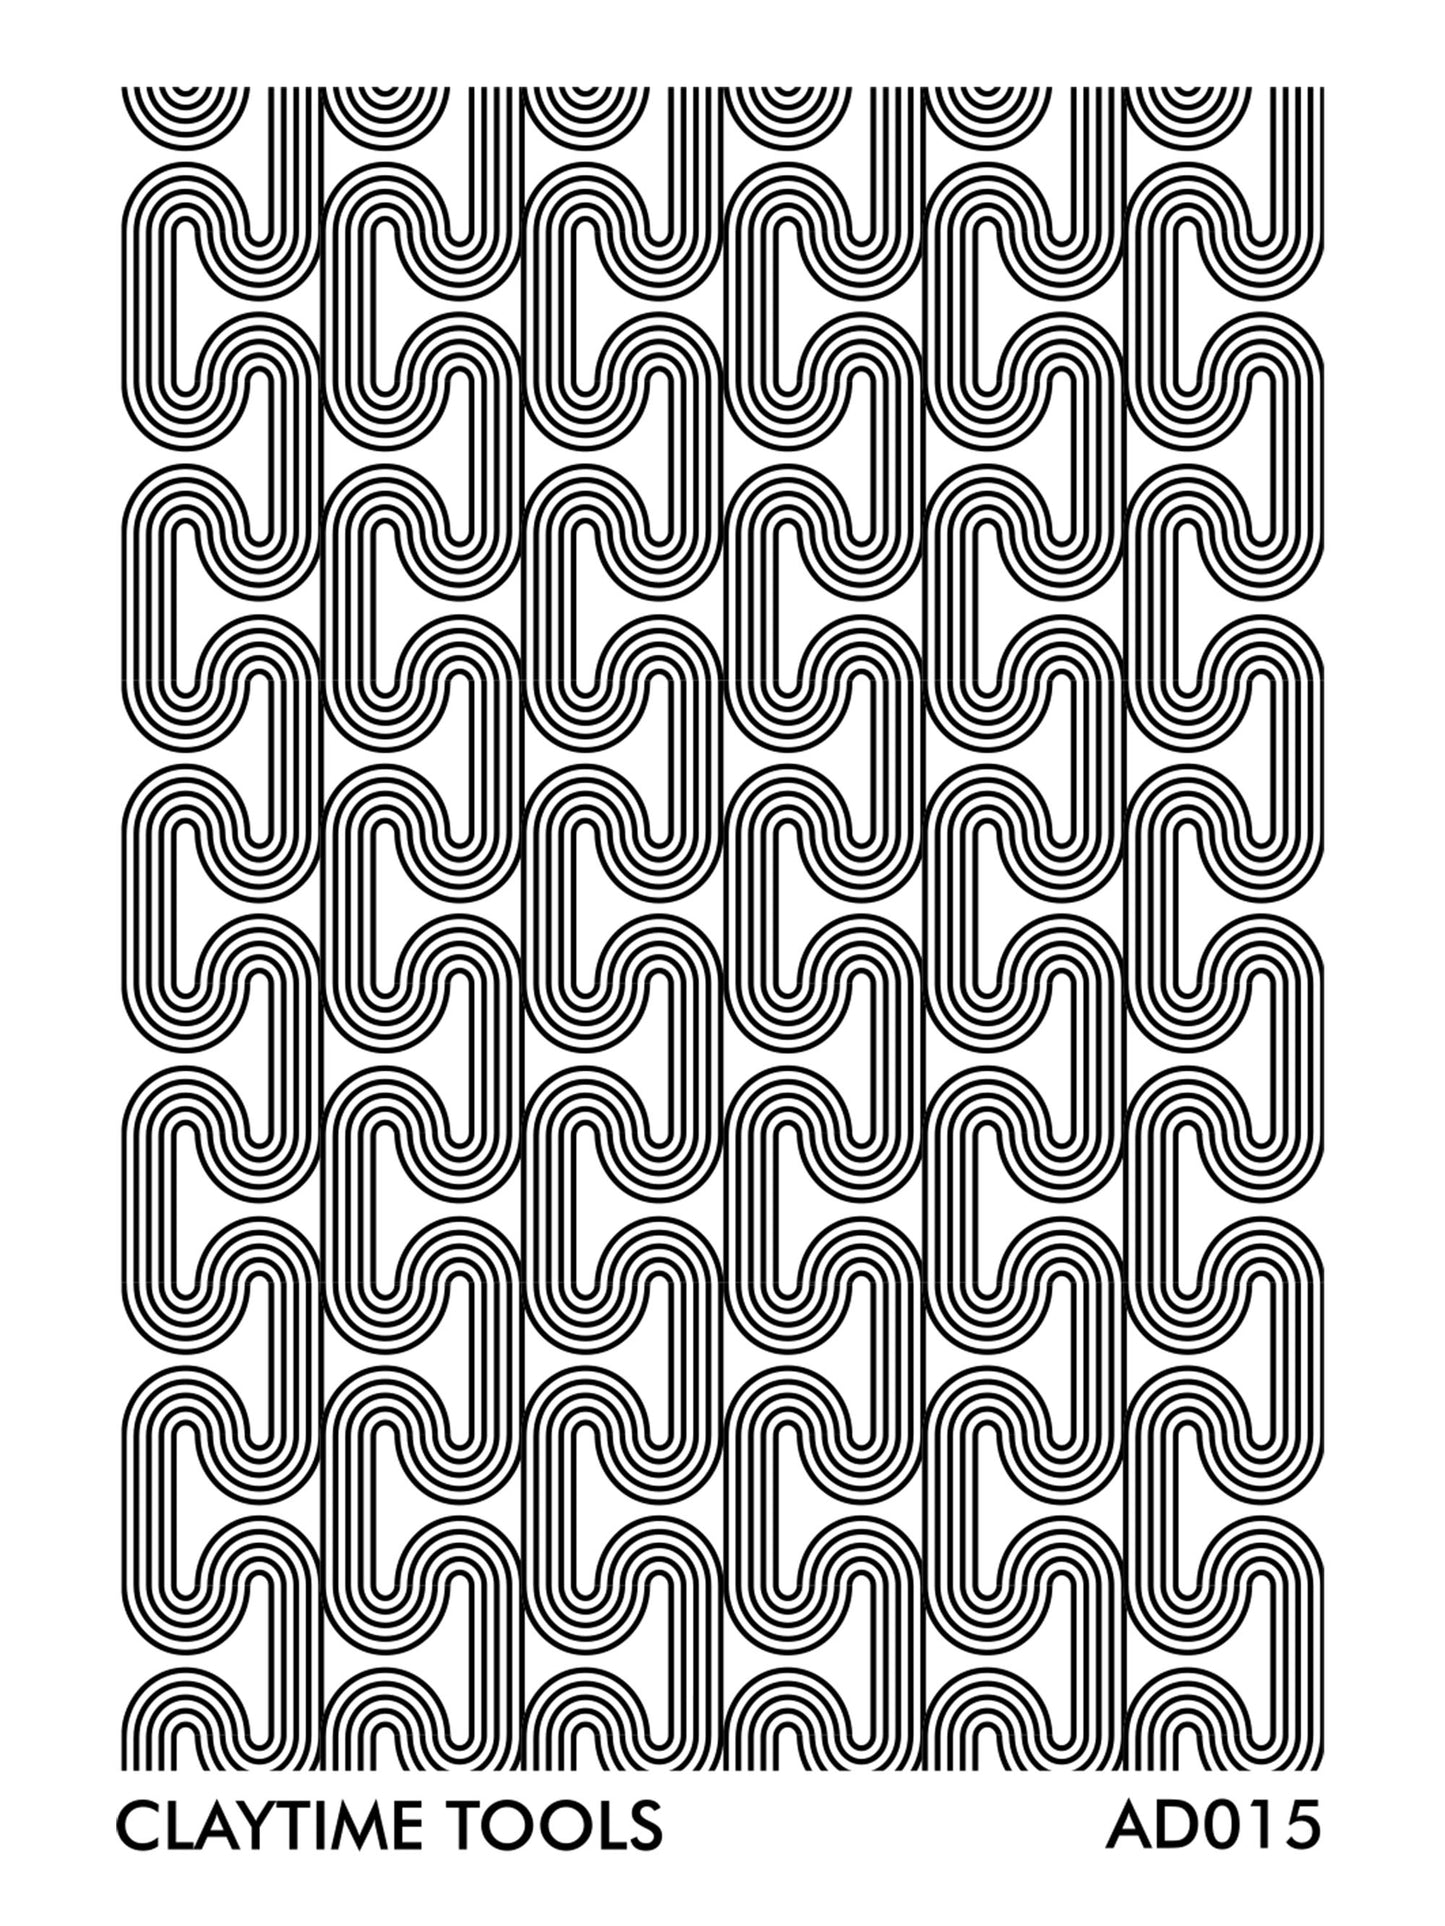 Art deco tubes motif in a white background.